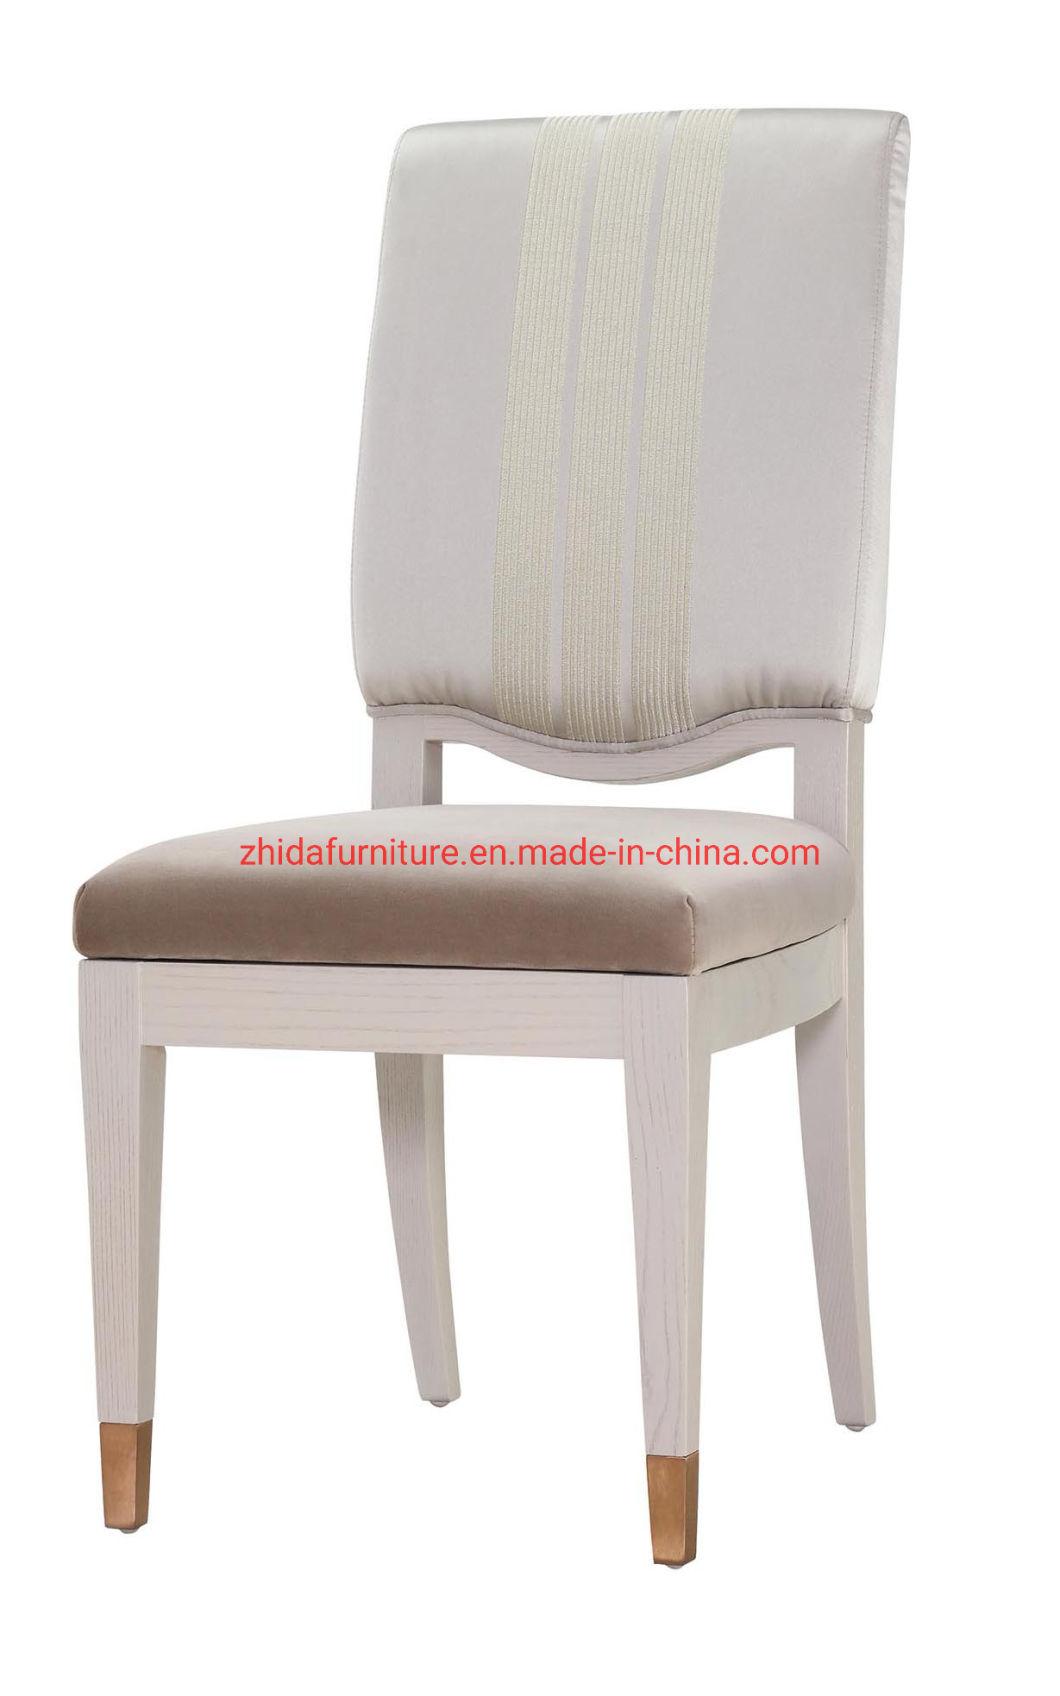 Solid Wood Frame High Quality Chair